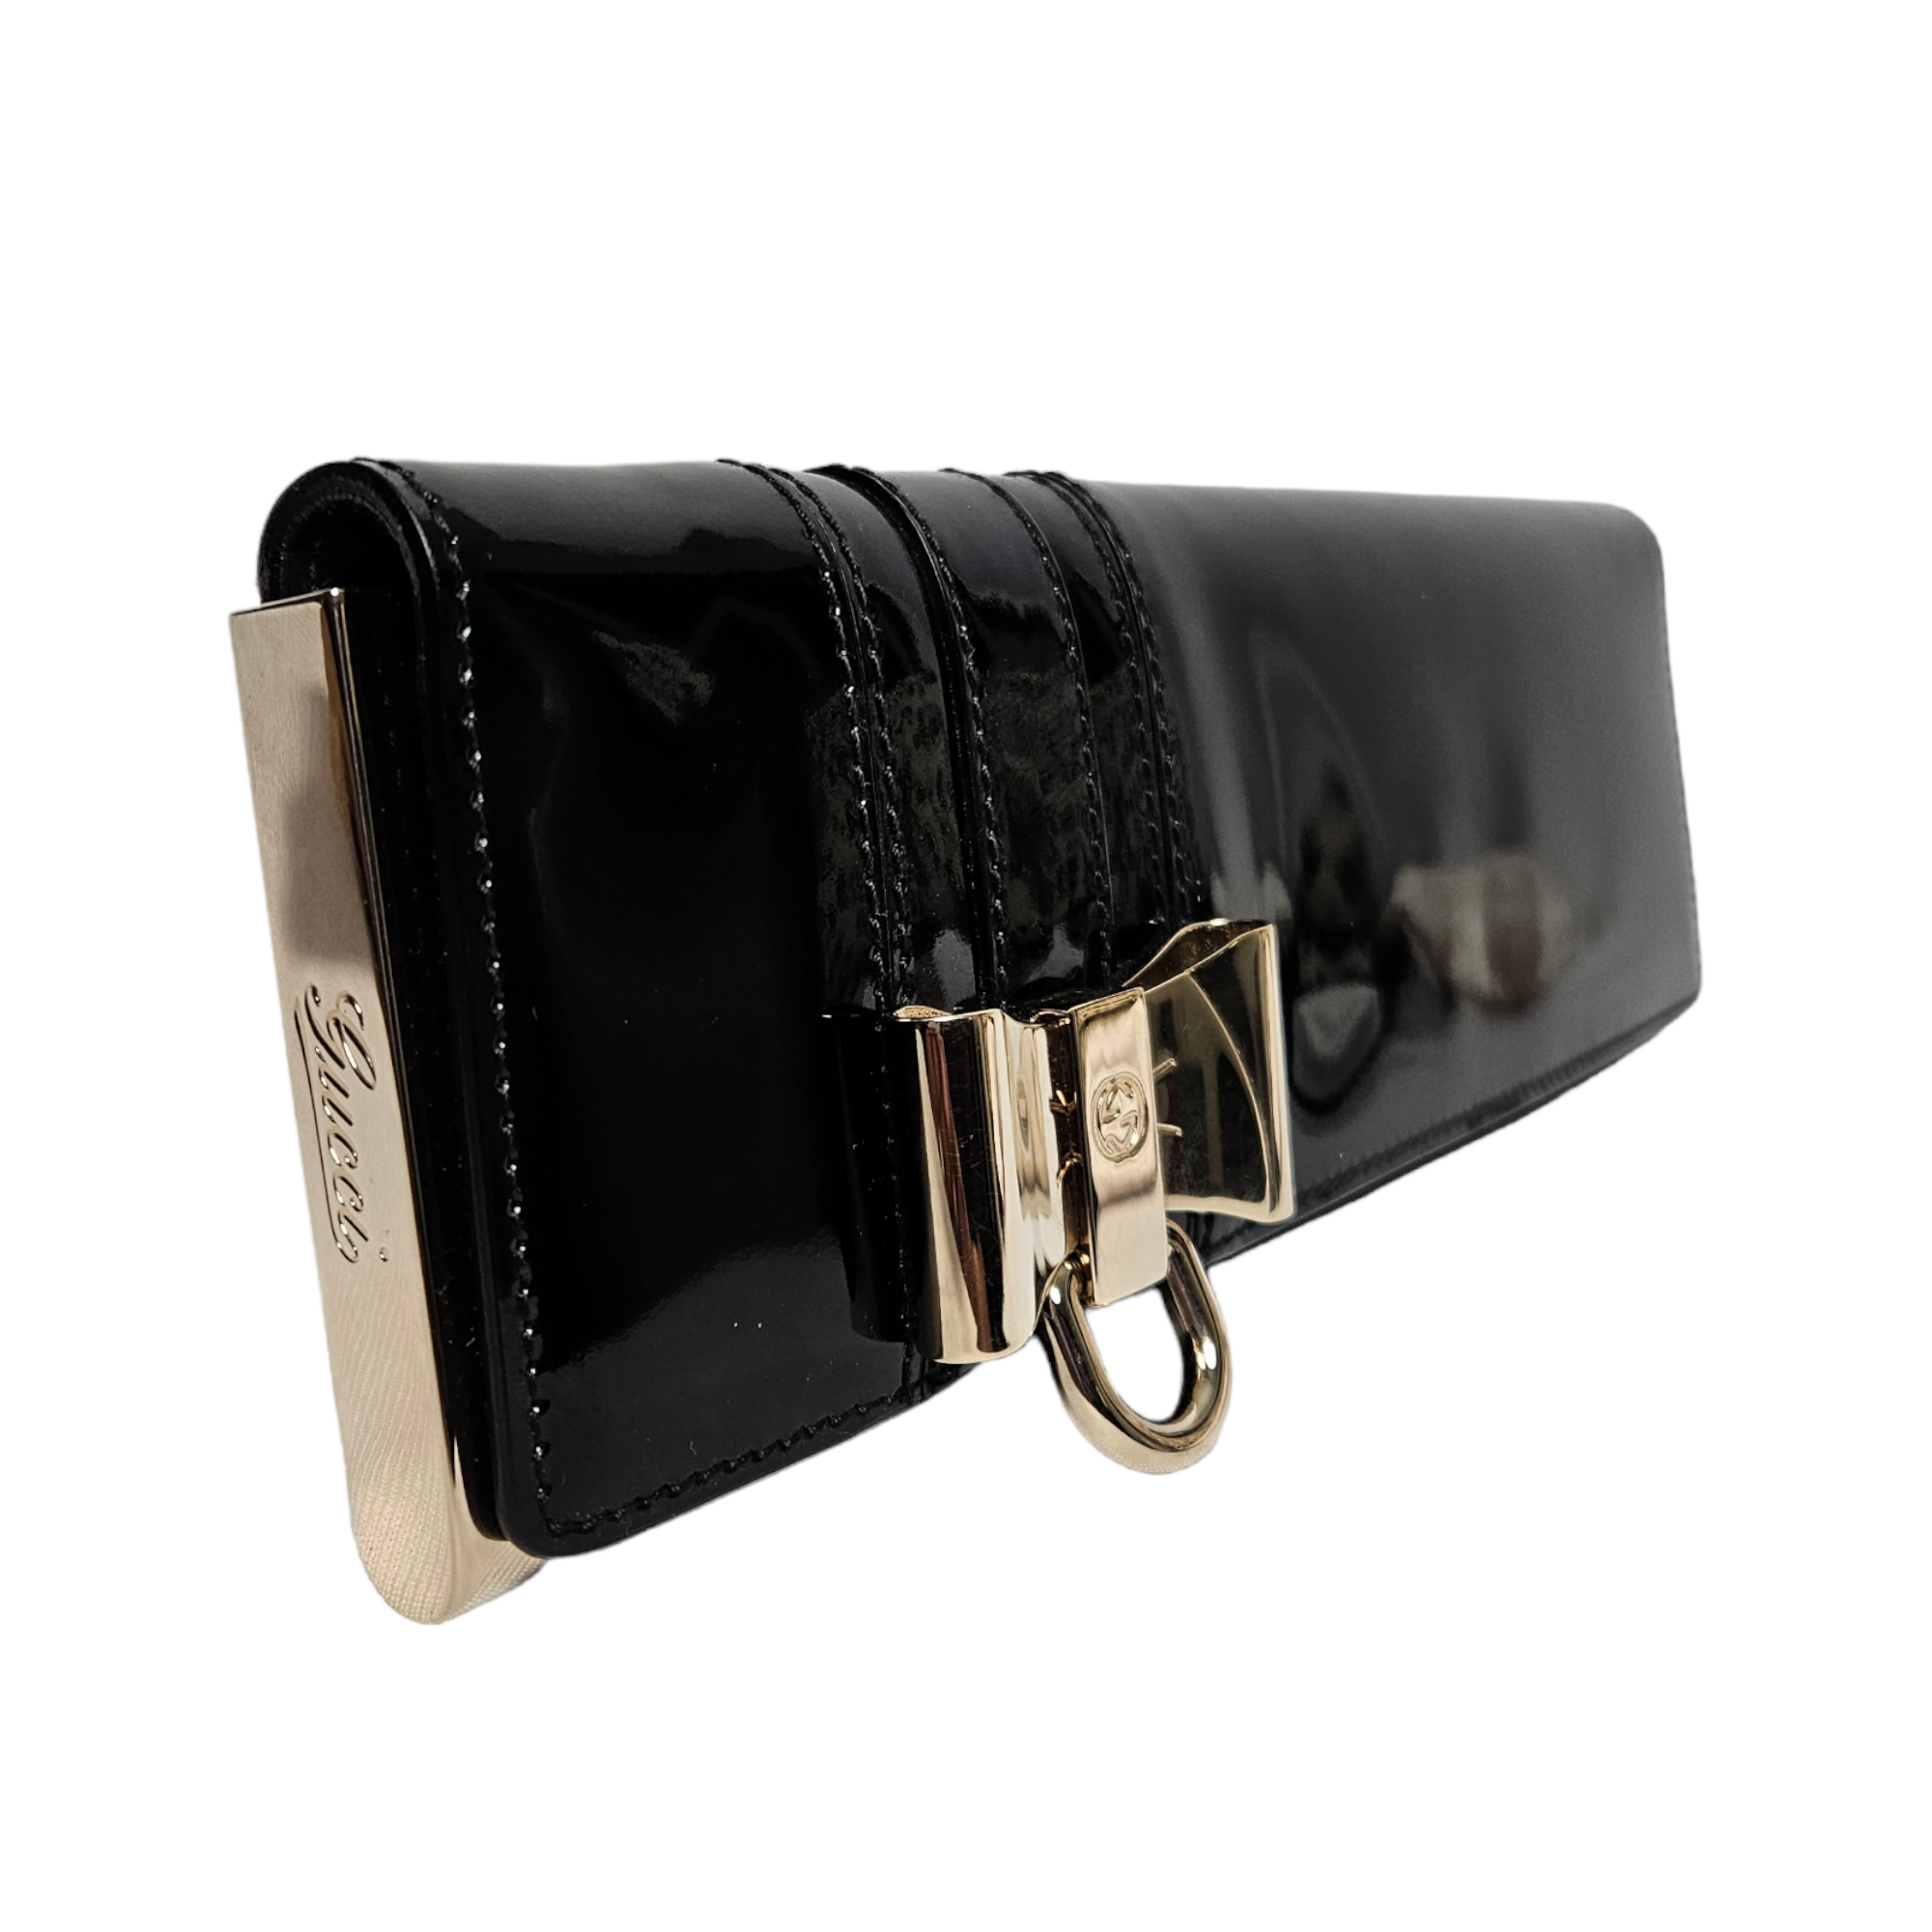 Buy Women PU Patent Leather Long Clutch Purse Case Waterproof Wristlet  Makeup Bag Online at Low Prices in India - Amazon.in